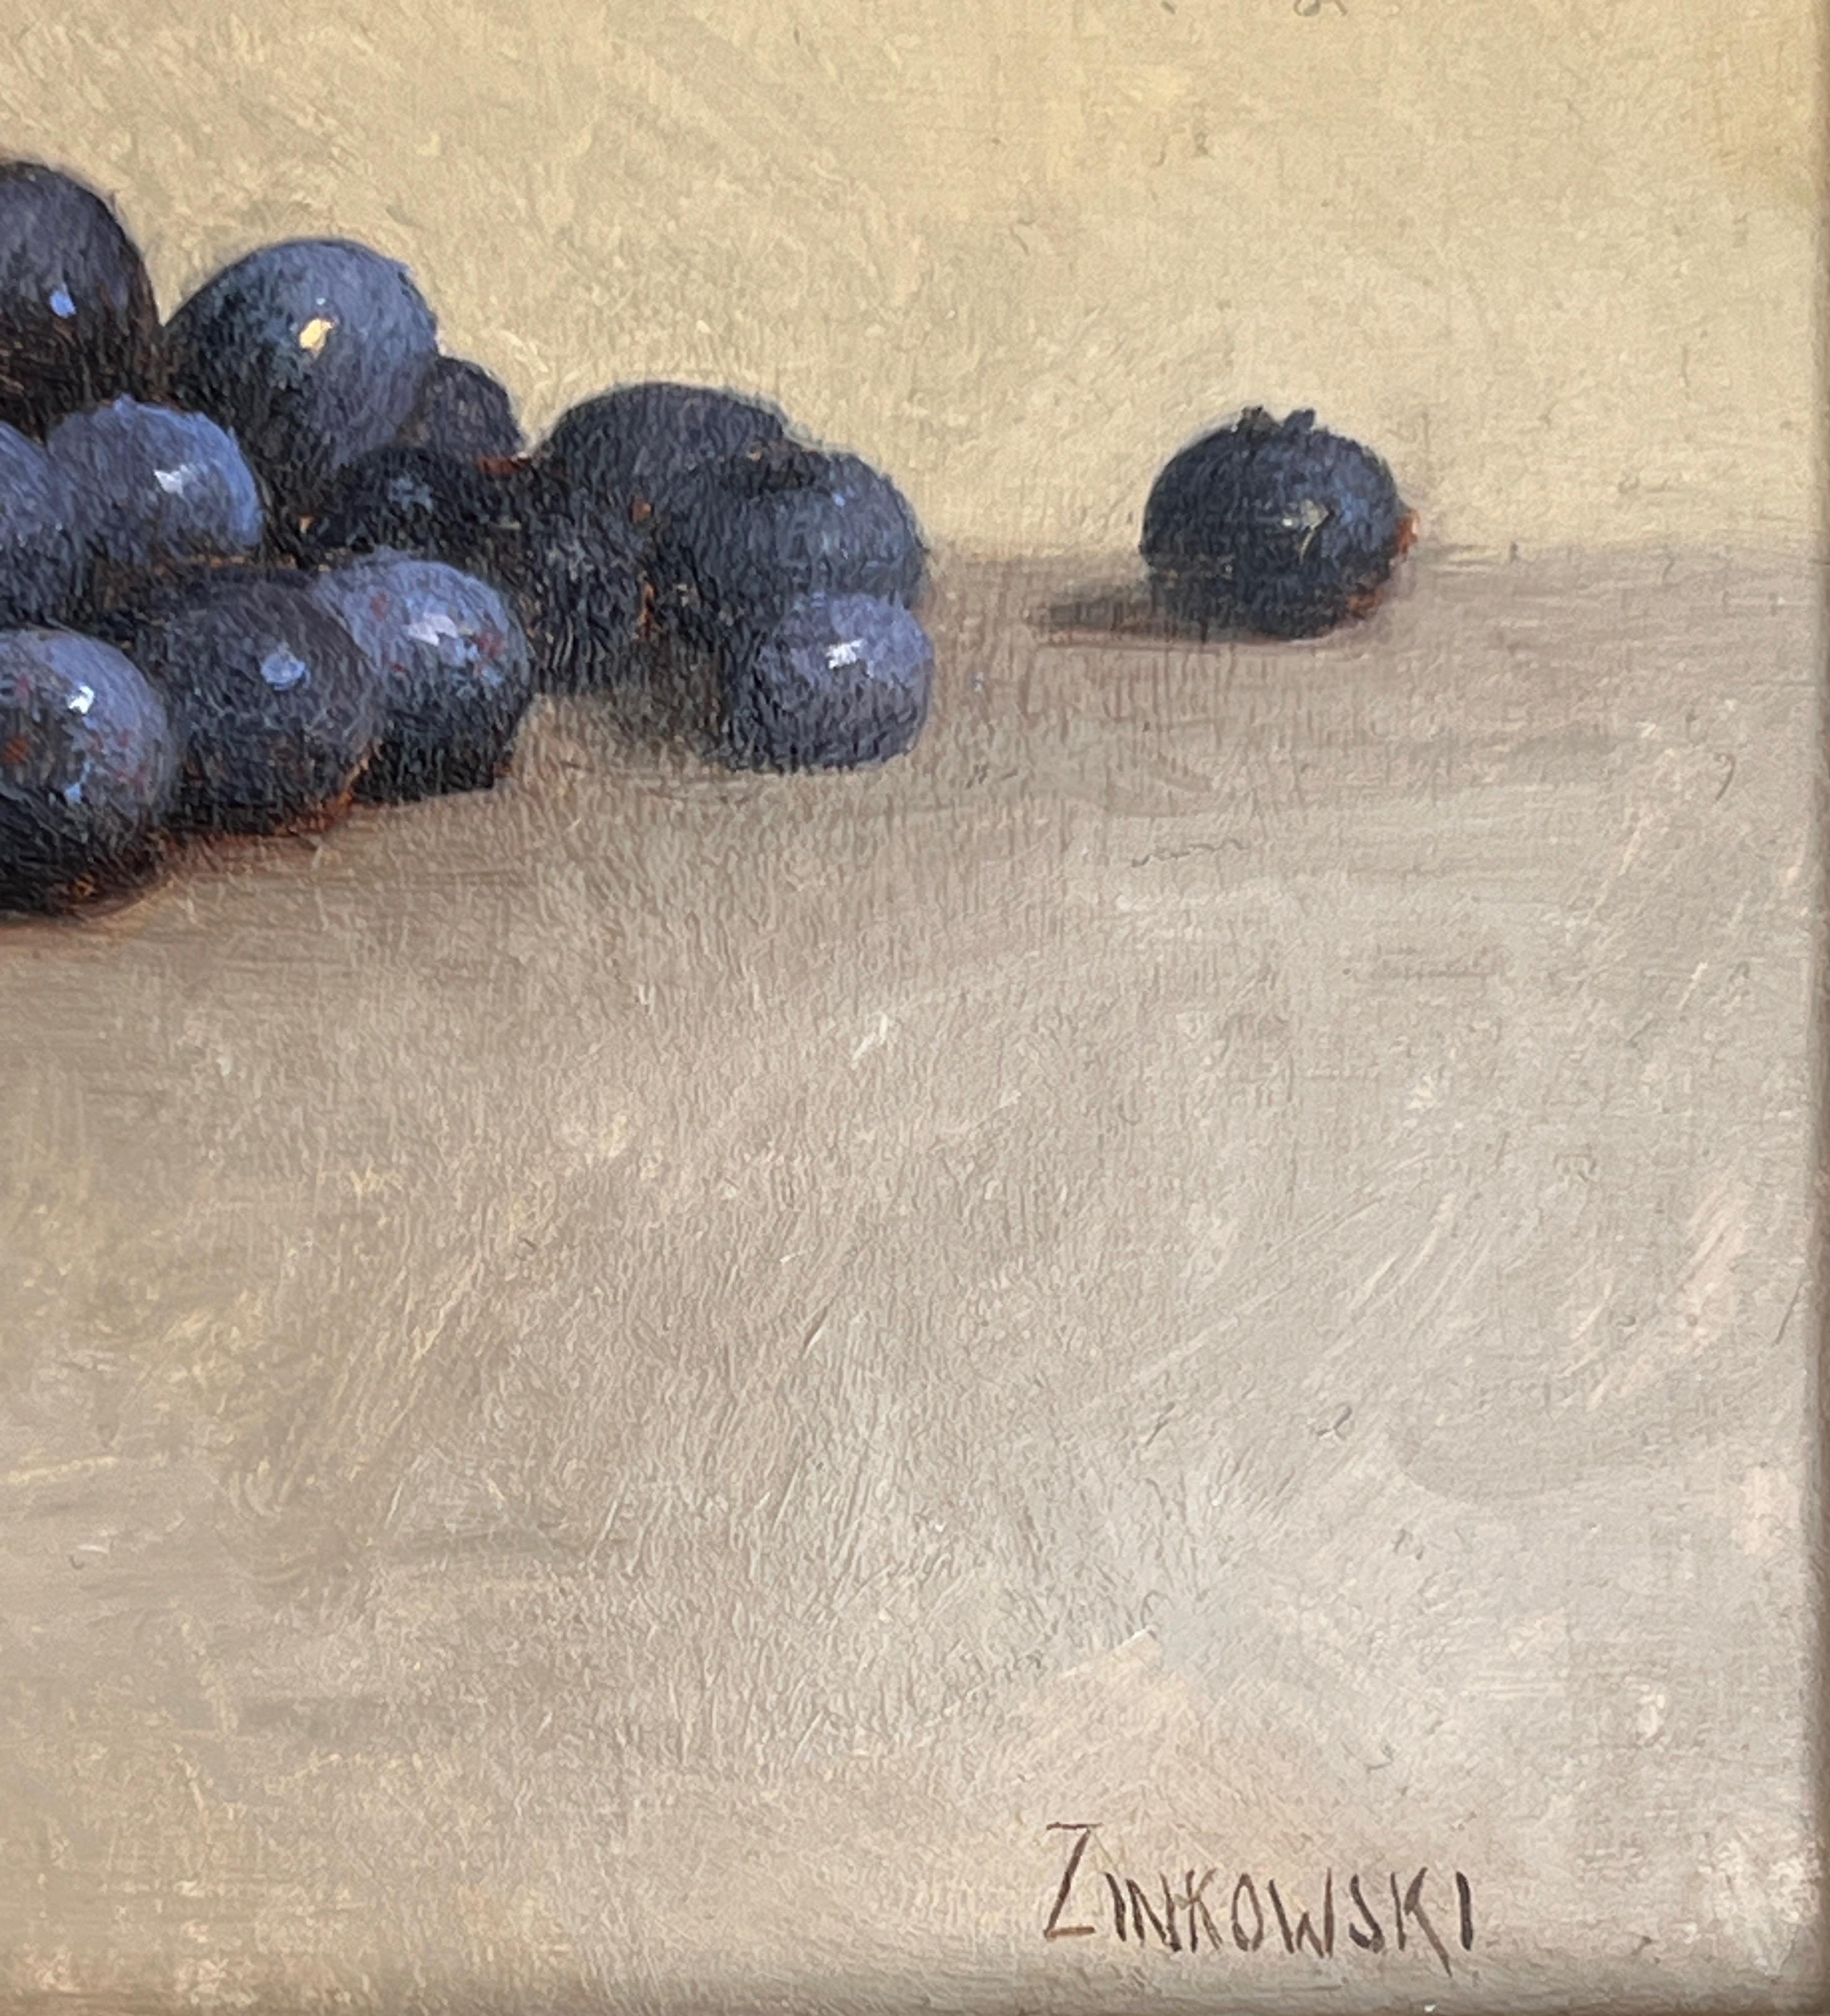 Dale Zinkowski is a master of still life. His work, reminiscent of Golden Age Dutch still life painting, glows with light and subtle, quiet beauty. This original oil painting shows a pile of blueberries illuminated by a soft light source outside the